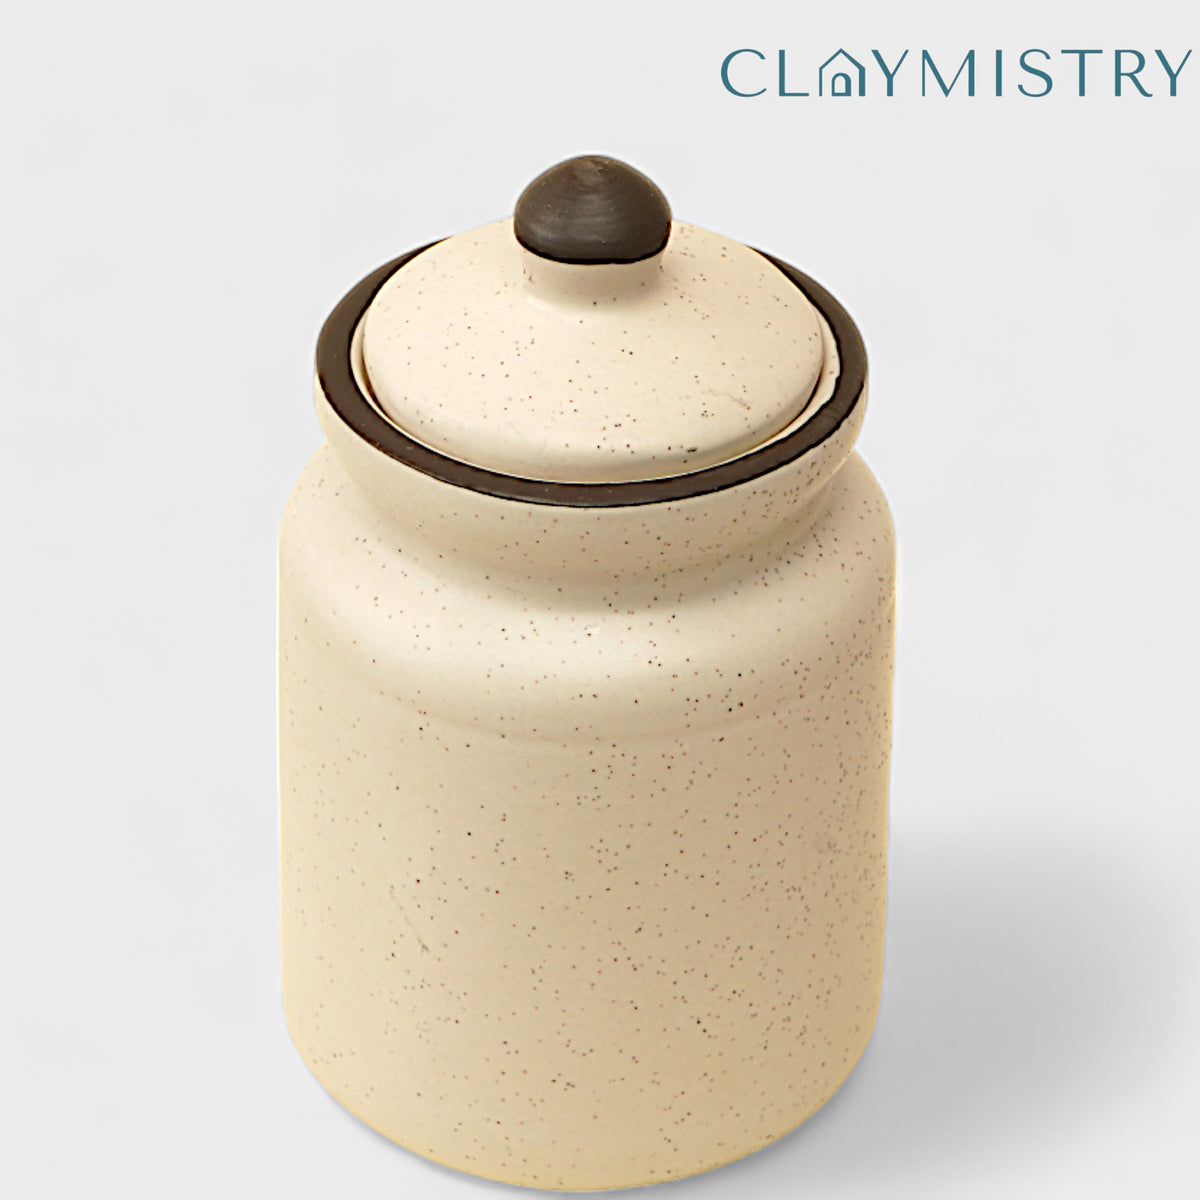 Claymistry Multi Utility Ceramic White with Brown Edges Storage Box with Lid | 9cm * 9cm * 16cm | Matte Finish | Spices, Ghee, Sugar, Food Storage Container | Dishwasher Safe | Tea Coffee Kettle Jar